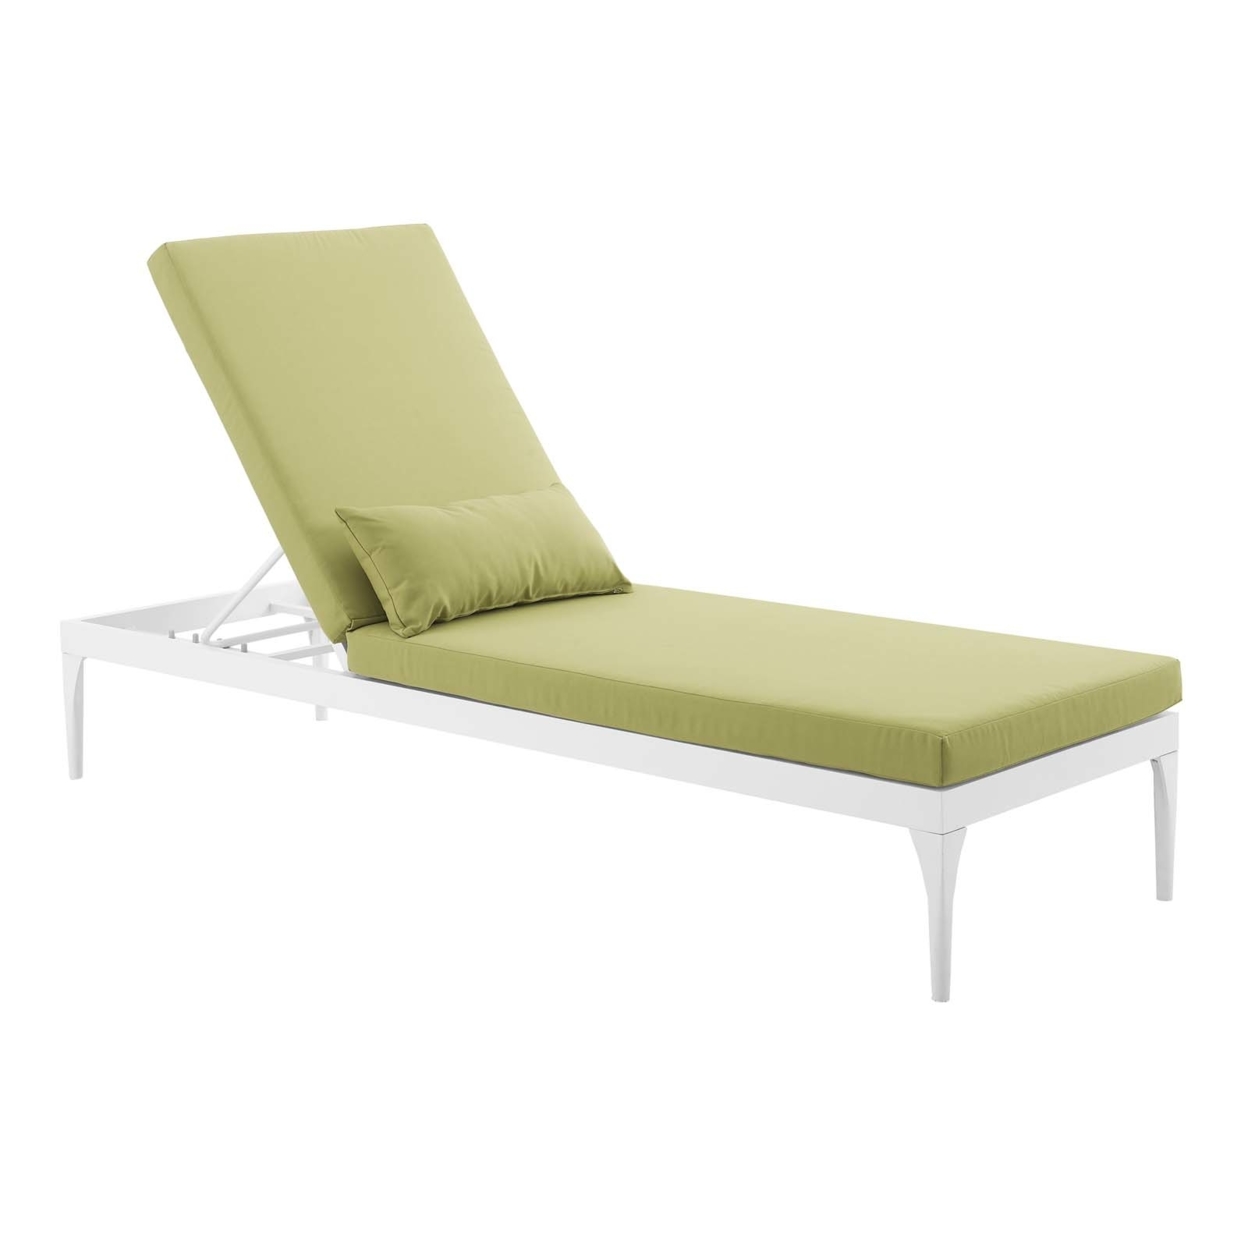 Perspective Cushion Outdoor Patio Chaise Lounge Chair (3301-WHI-PER)